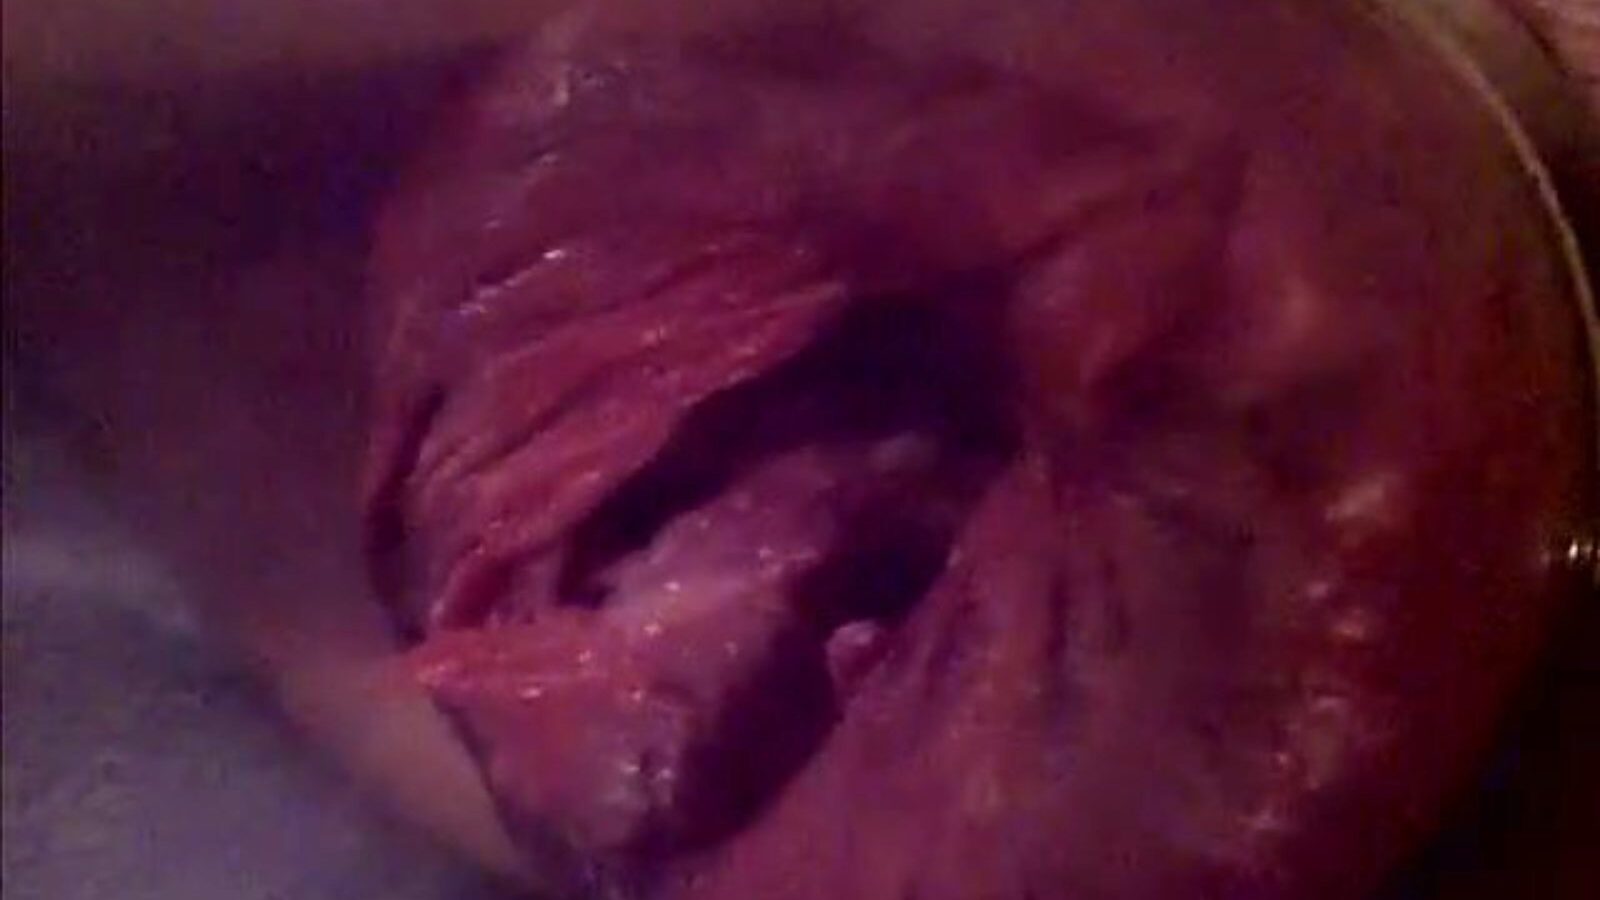 Big Pussy Pumped Enormously to a Gape Pumped my vagina to a utter throated gape Biggest pump ever made me jizm so firm and lengthy then fisted